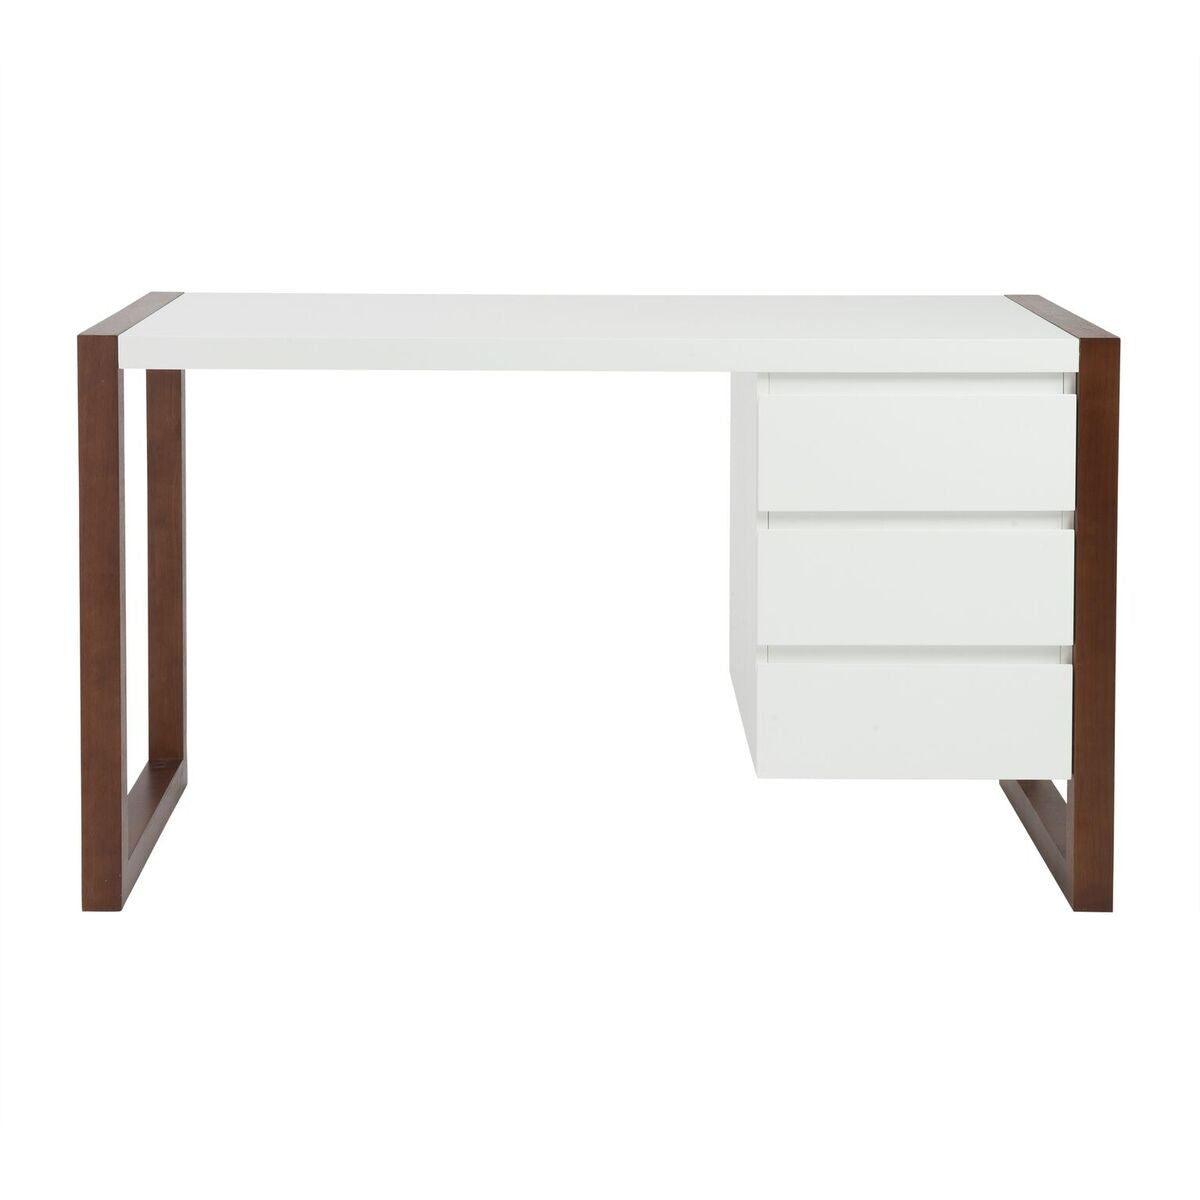 51 White Walnut Desk With Drawers By Euro Style Officedesk Com